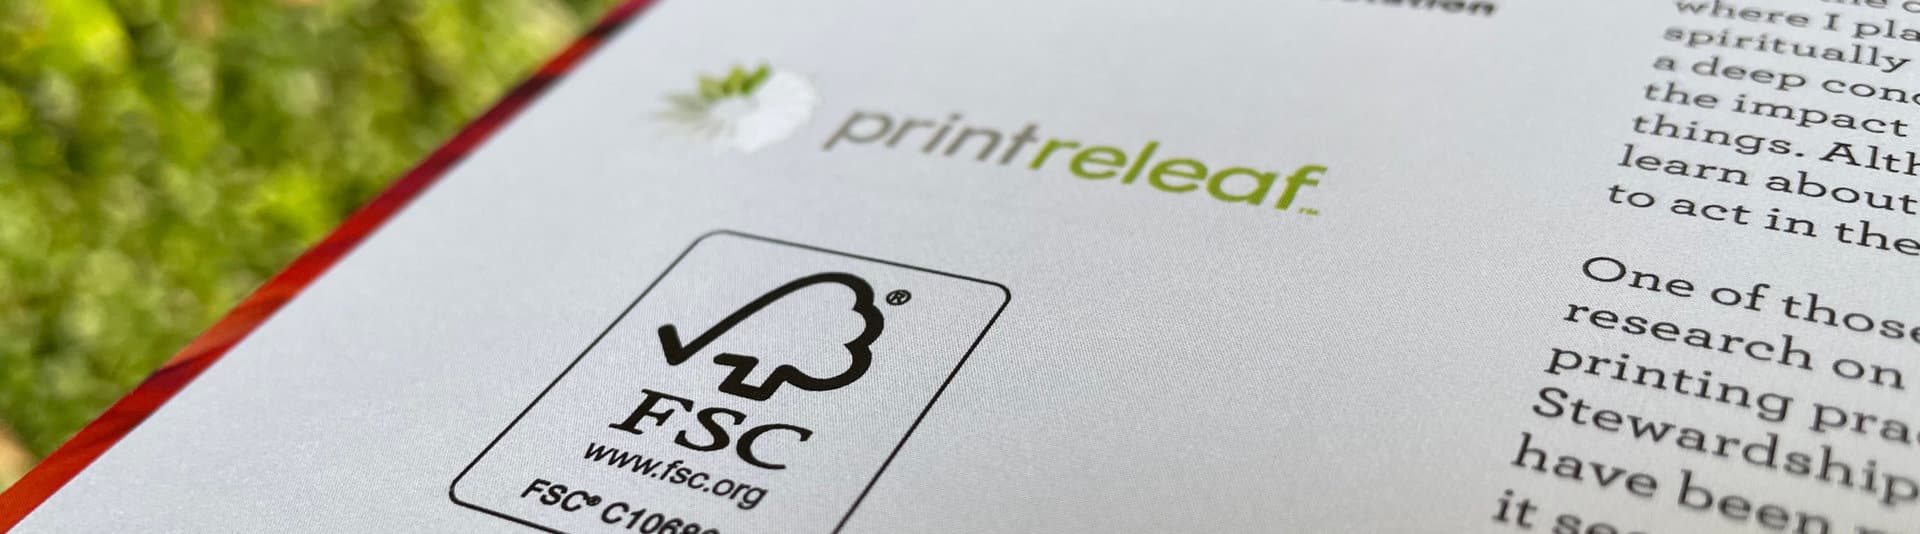 Eco Conscious Printing banner